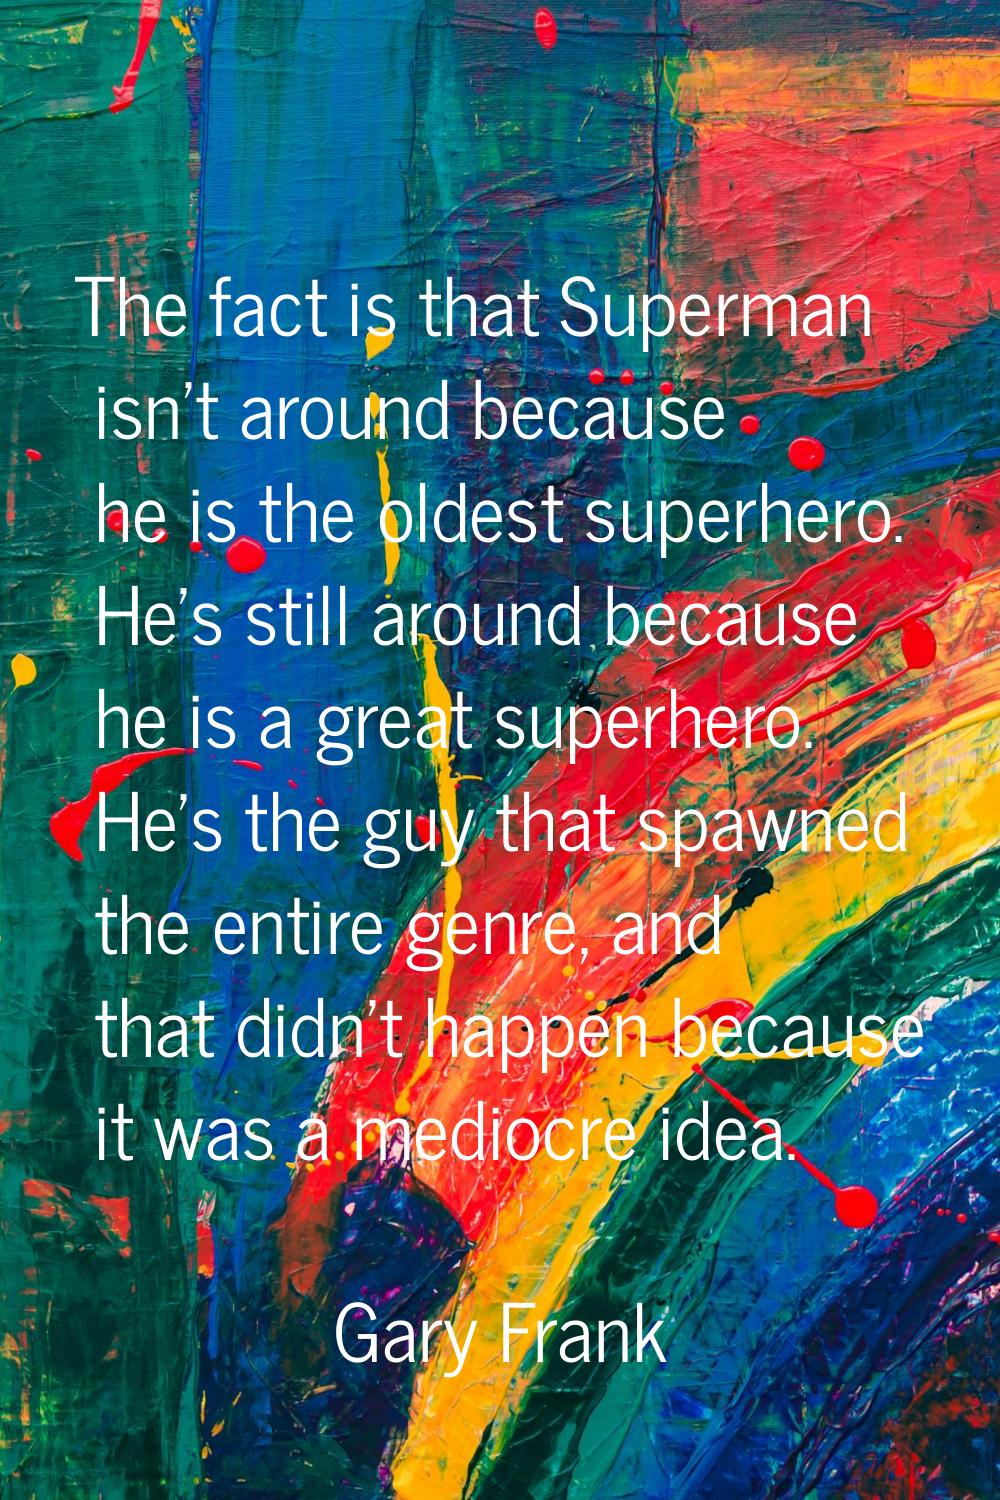 The fact is that Superman isn't around because he is the oldest superhero. He's still around becaus